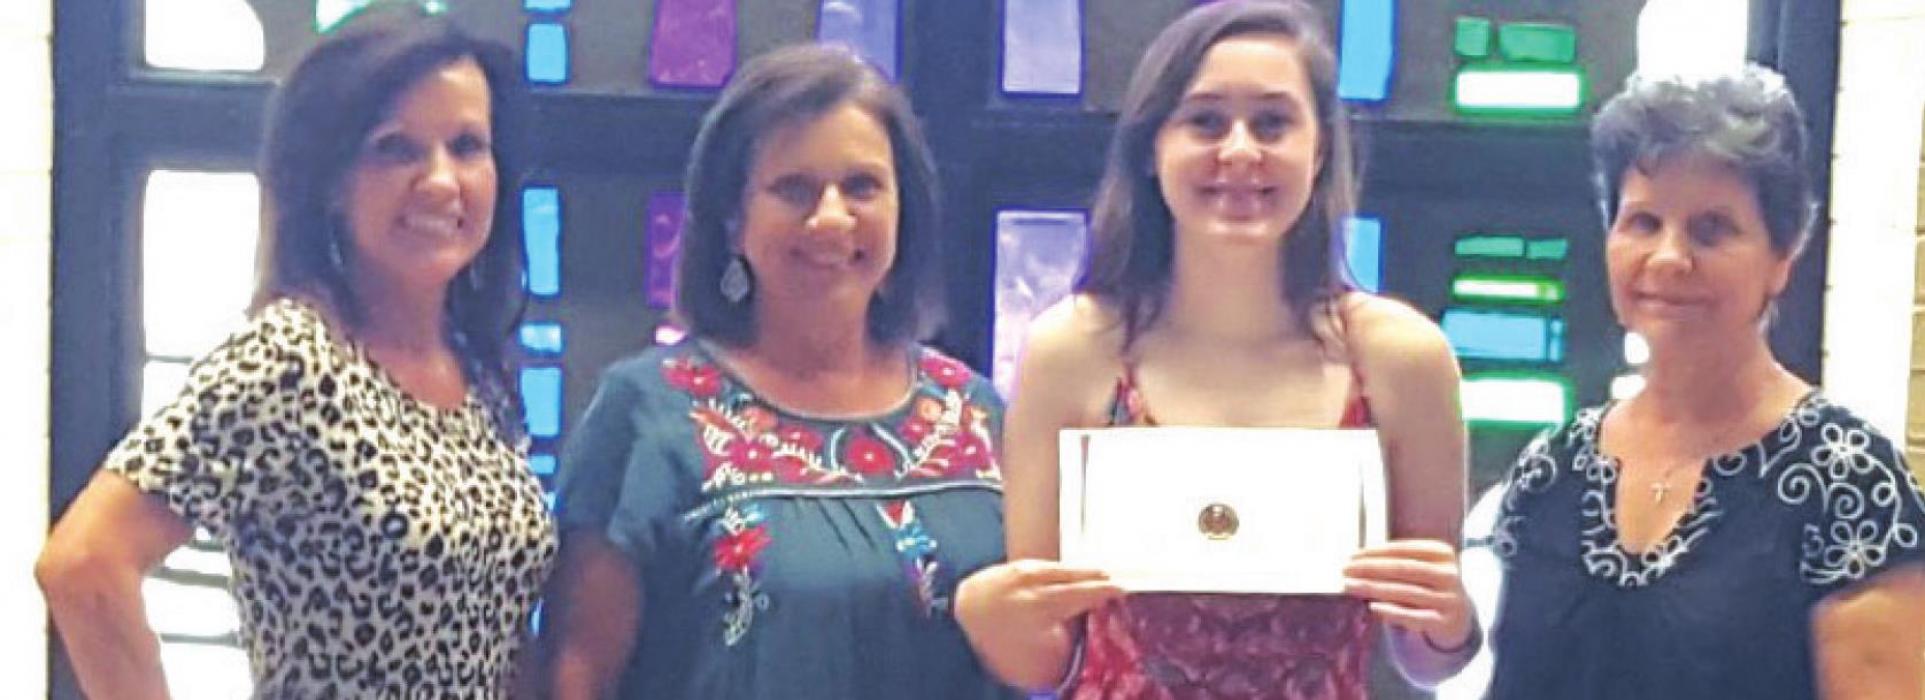 The Ruby Lee and Allen Faldyn, Sr. Memorial Scholarship was awarded to Haley Driskell, daughter of Melissa and Chris Driskell. The memorial family presenters were from left, Marilyn Freedman, Betty Weyand and Doris Citzler.